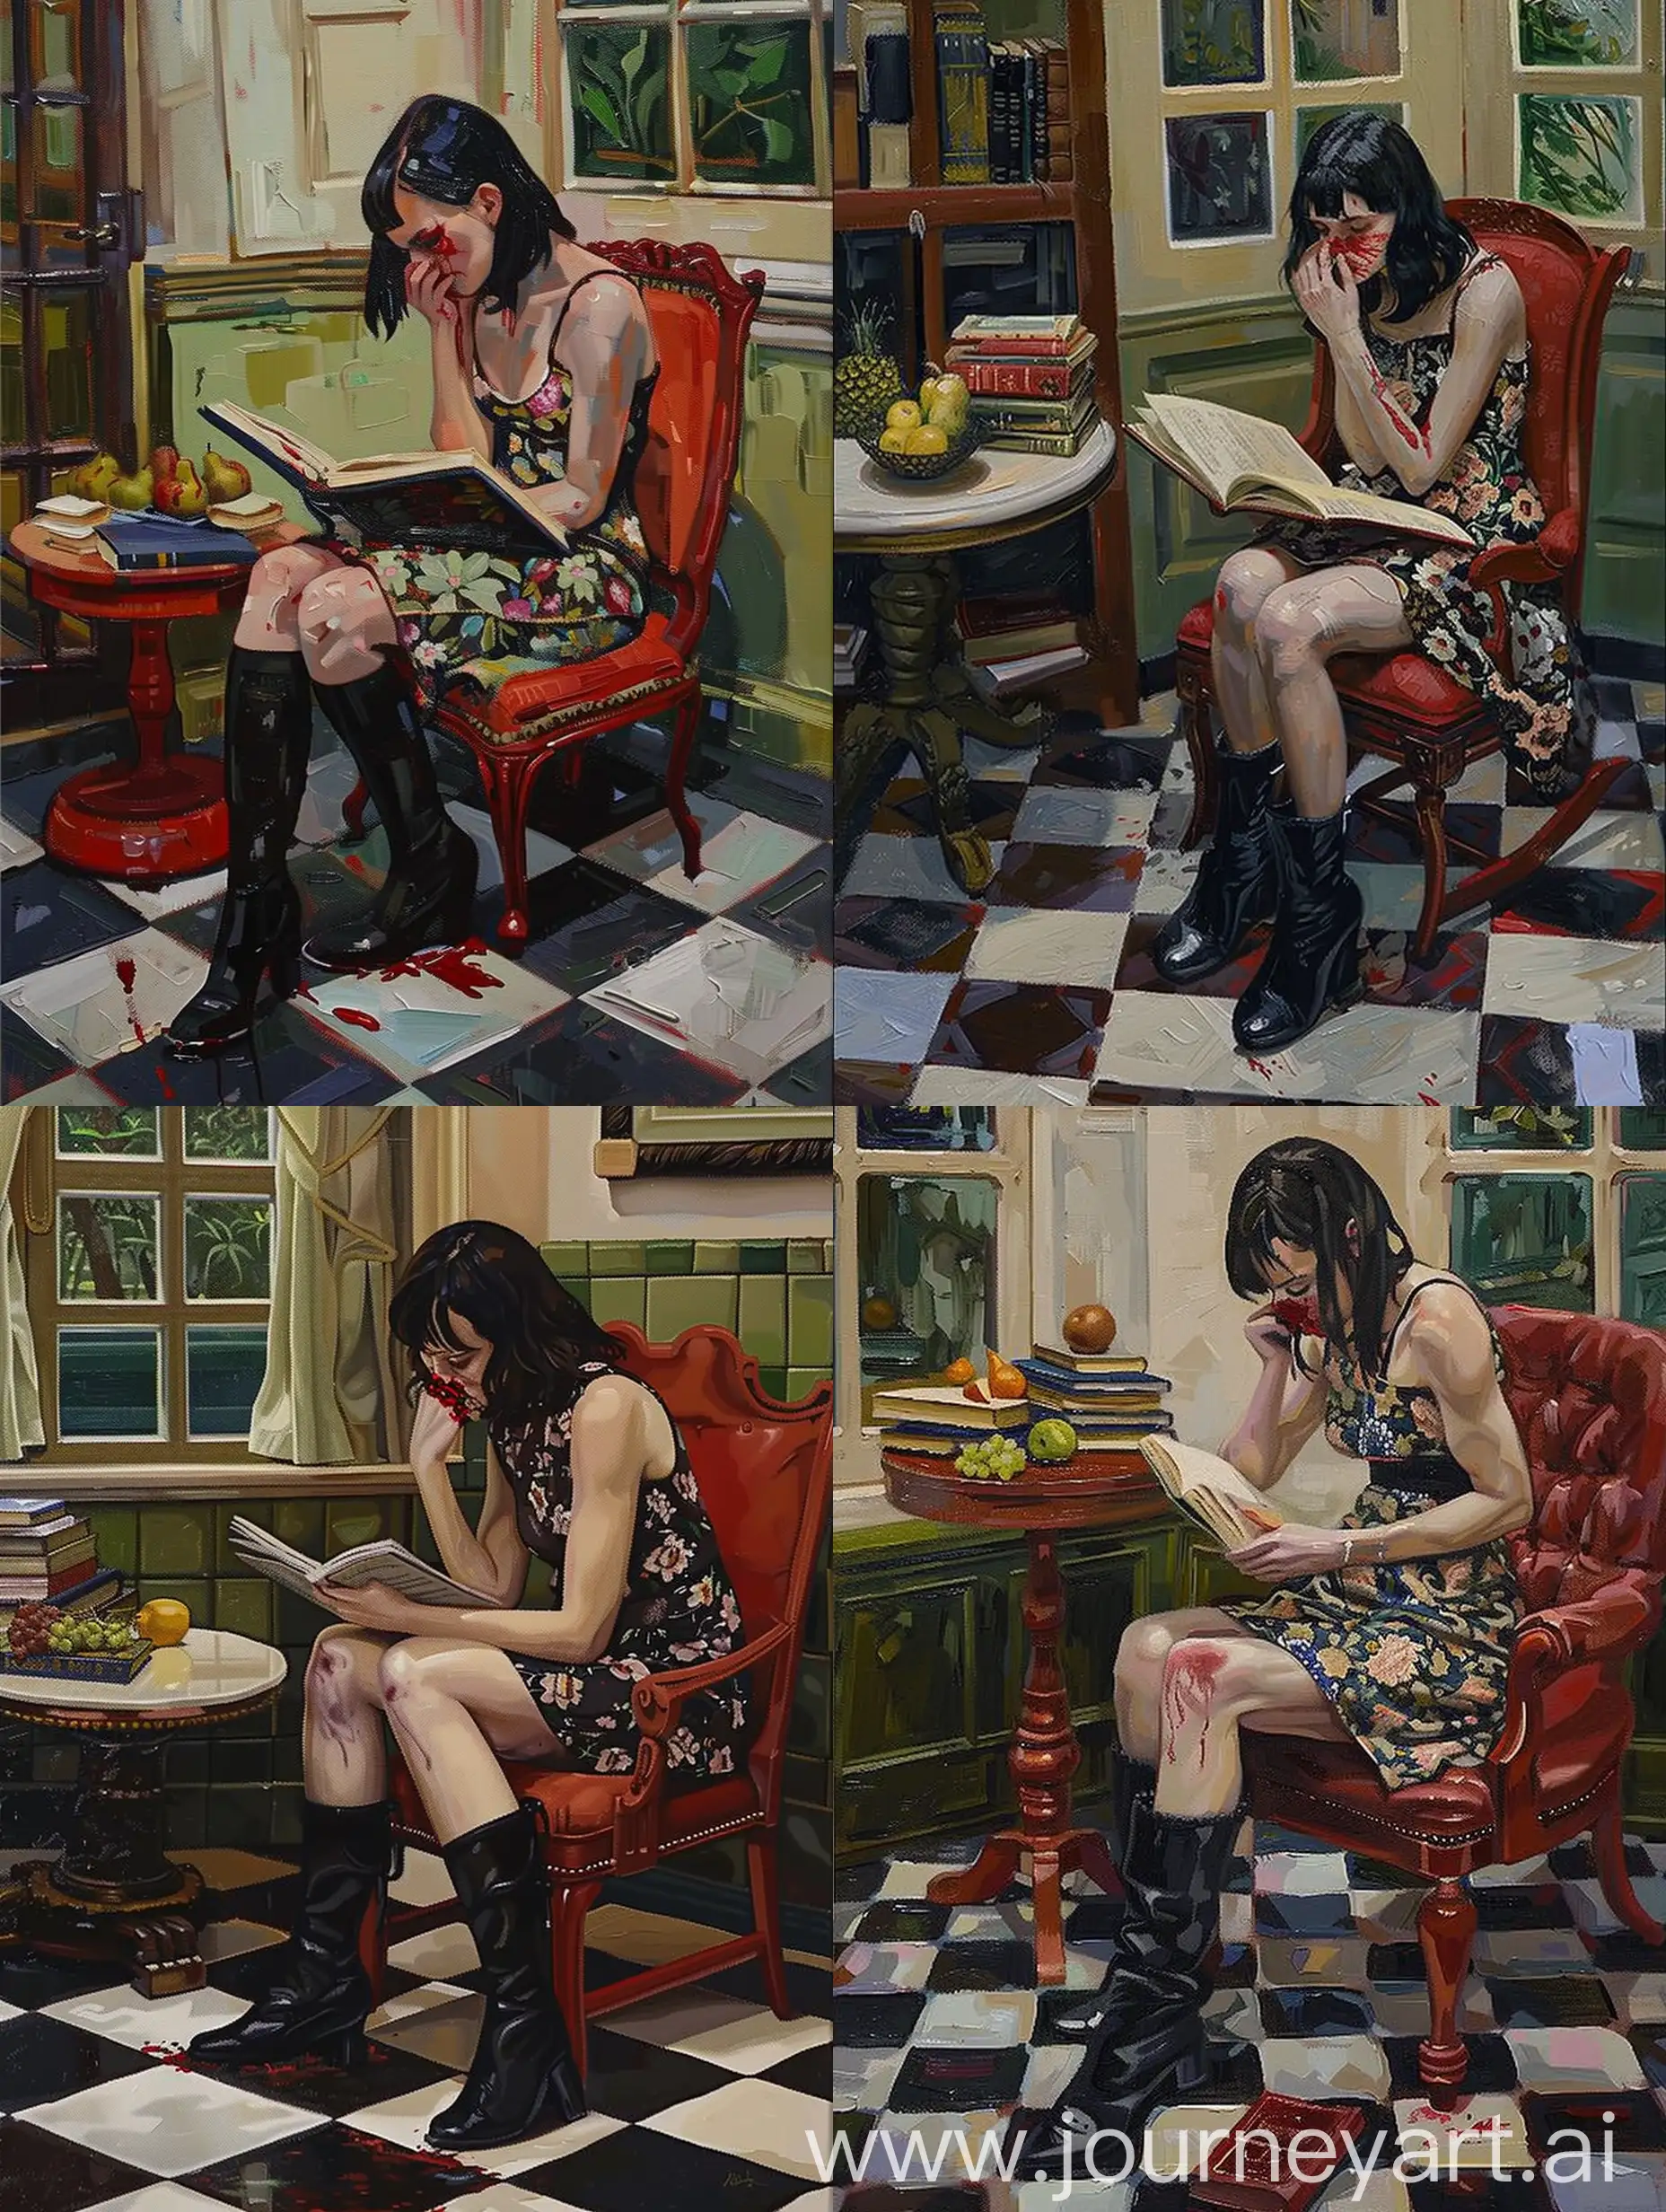 oil painting of a woman seated on a red chair, absorbed in reading a book with bleeding nose. She is dressed in a sleeveless floral dress and black knee-high boots, set in a room with a checkered floor. A round table with books and fruit is beside her, with a window showing greenery outside. The painting style is realistic, emphasizing light and shadows in van gogh